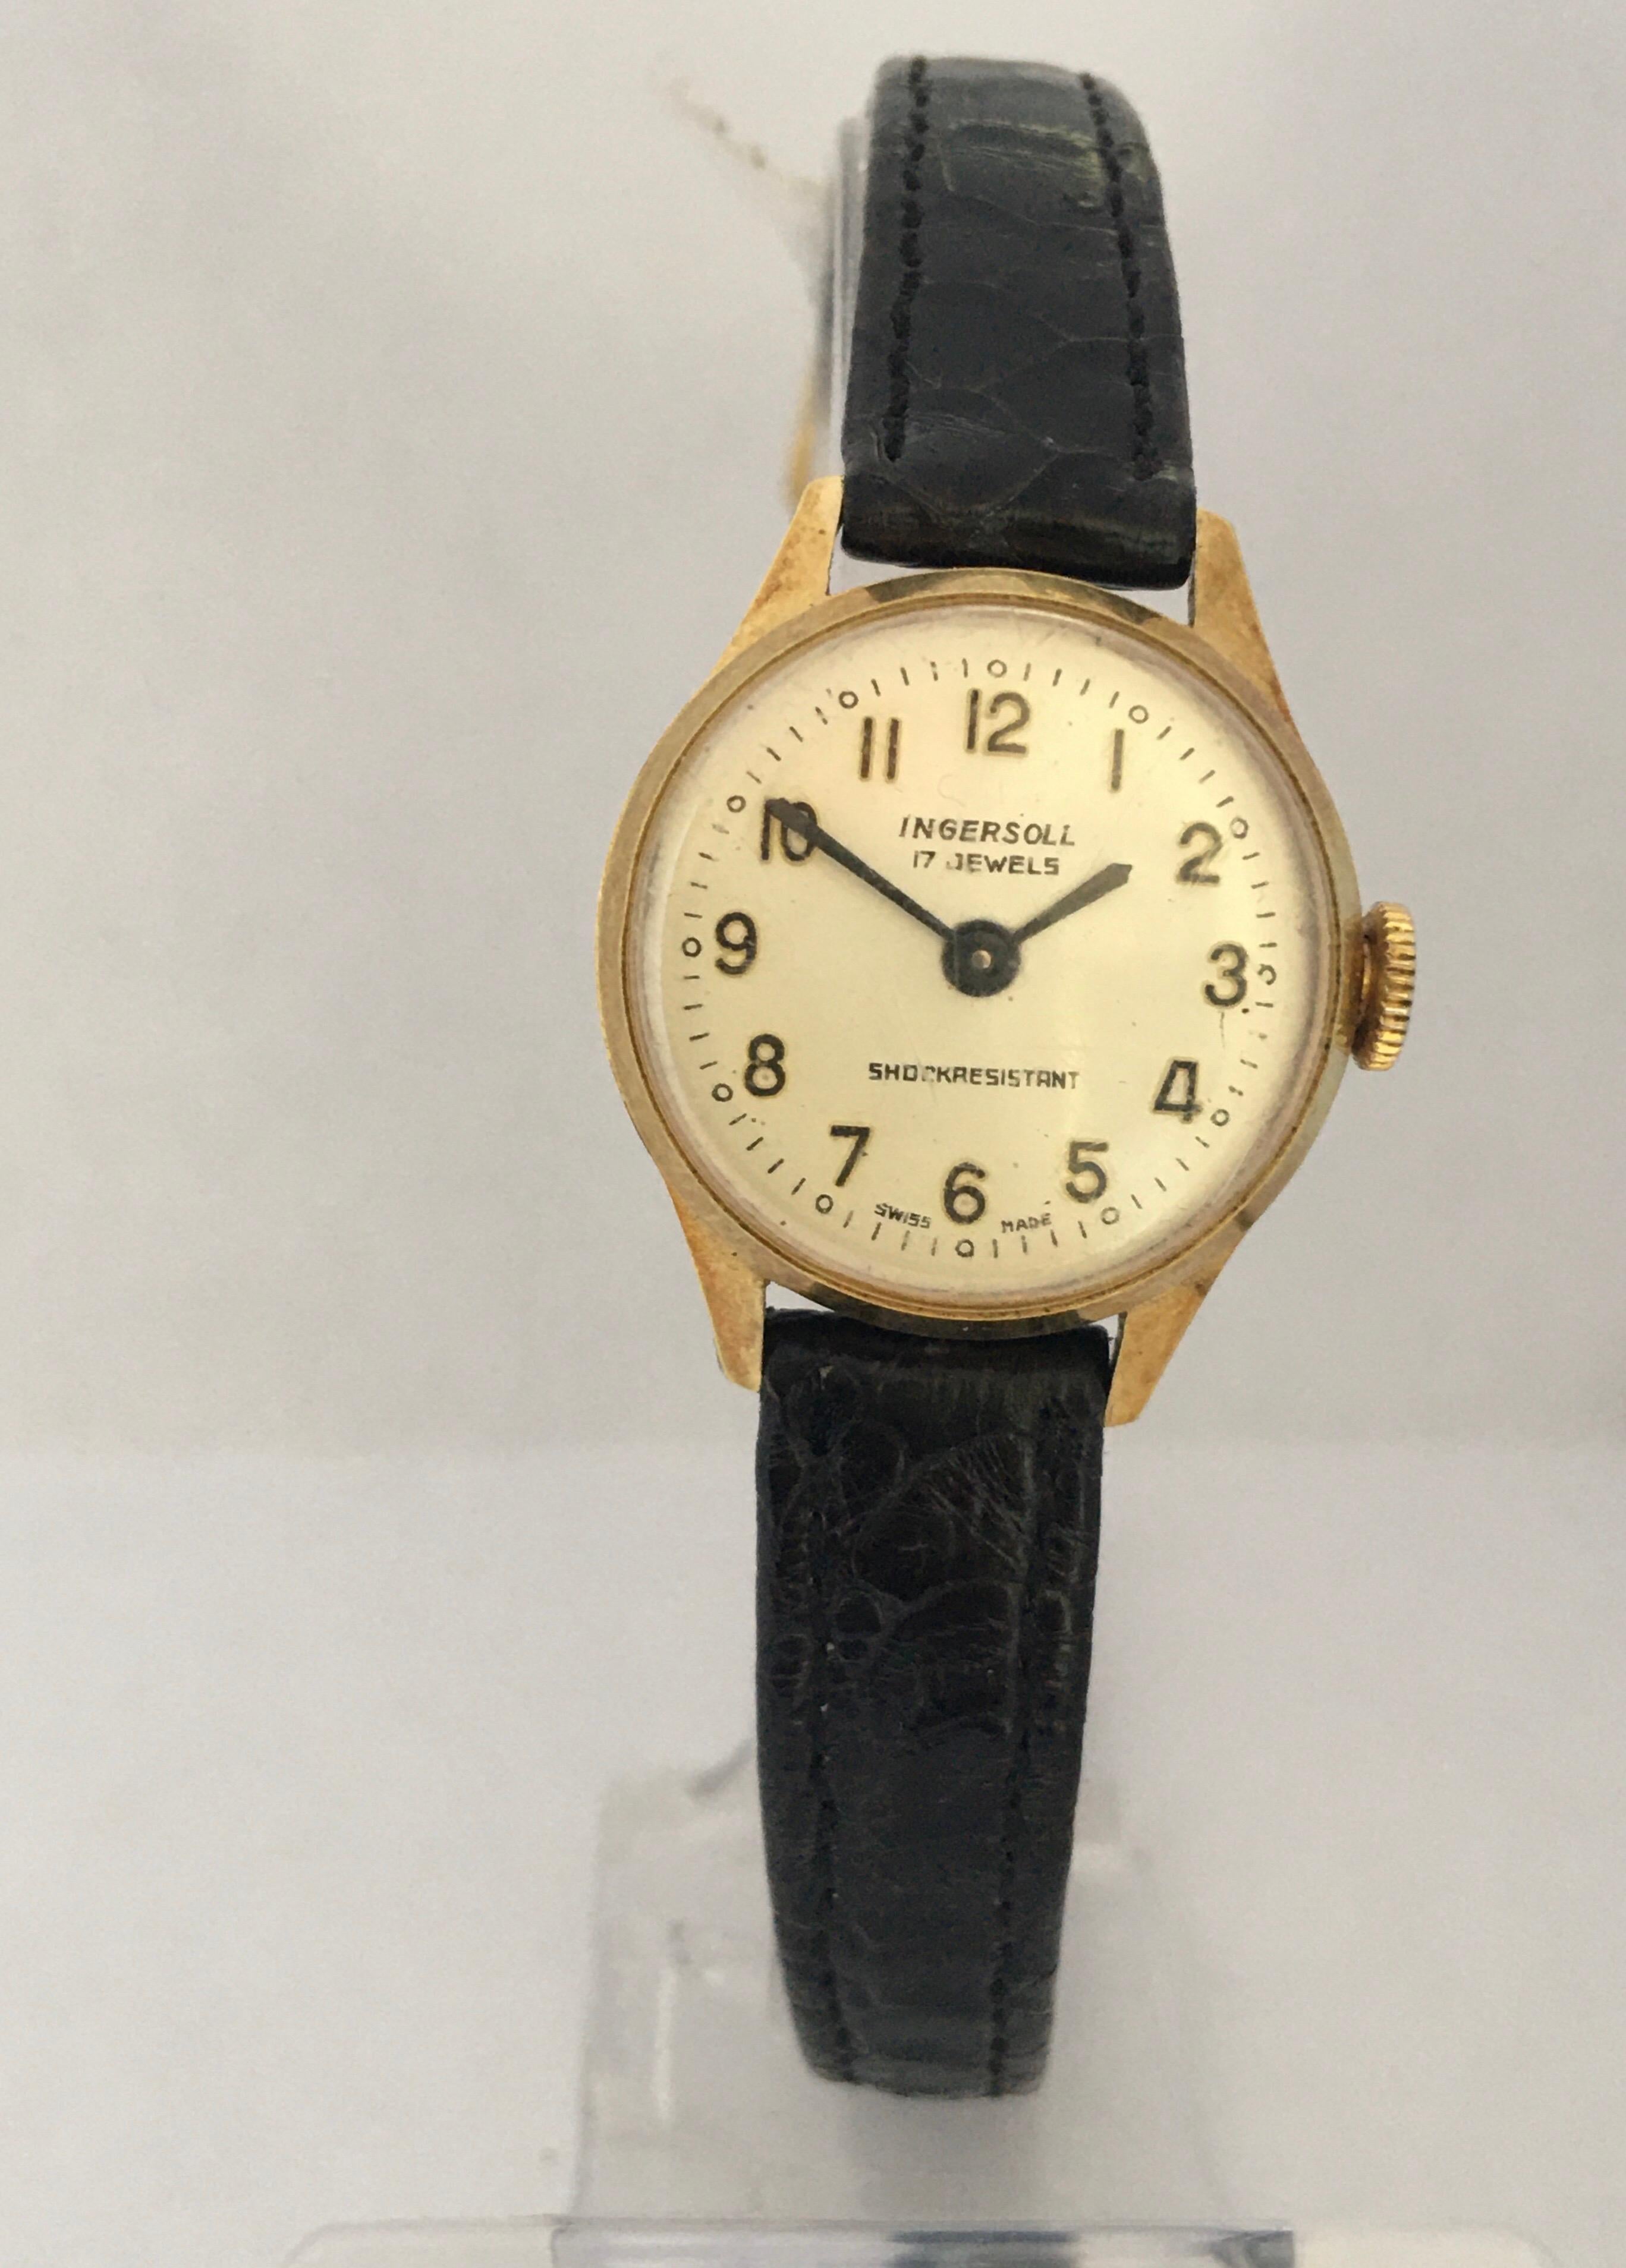 Ladies Vintage Gold-Plated Ingersoll Mechanical Watch 3